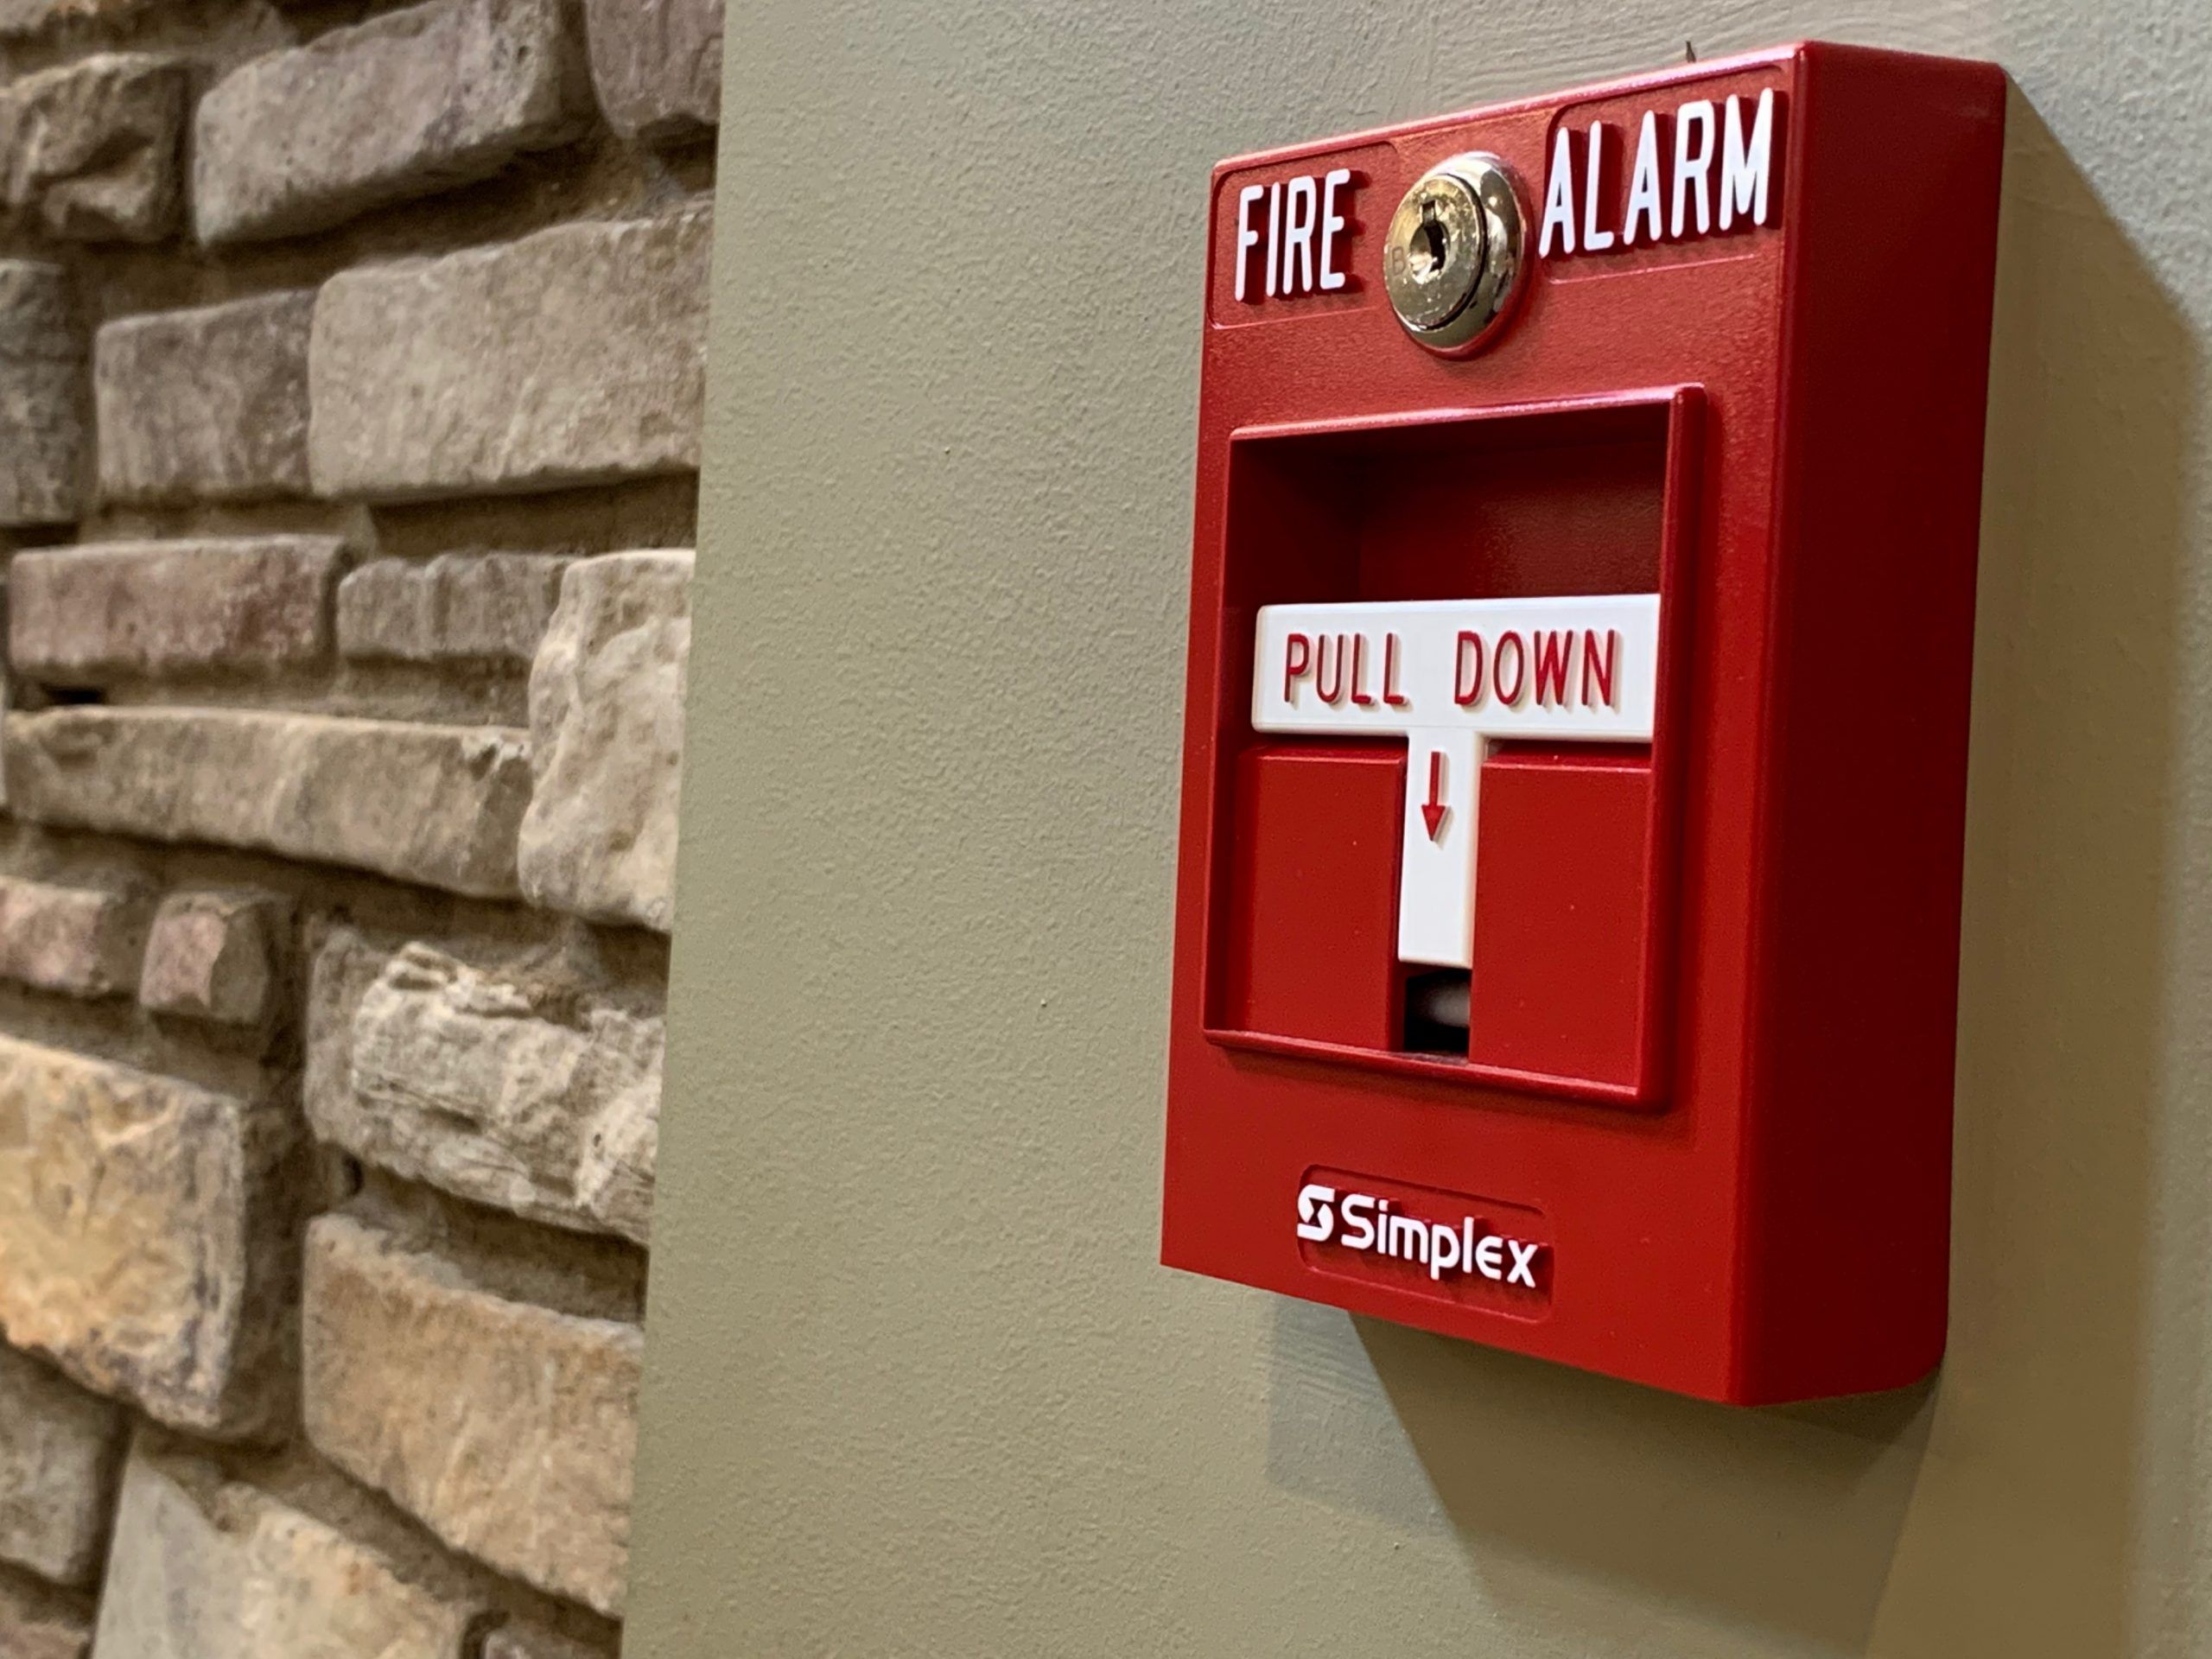 One of many fire alarms in the dorm buildings. Photo by Gabrielle Cellucci